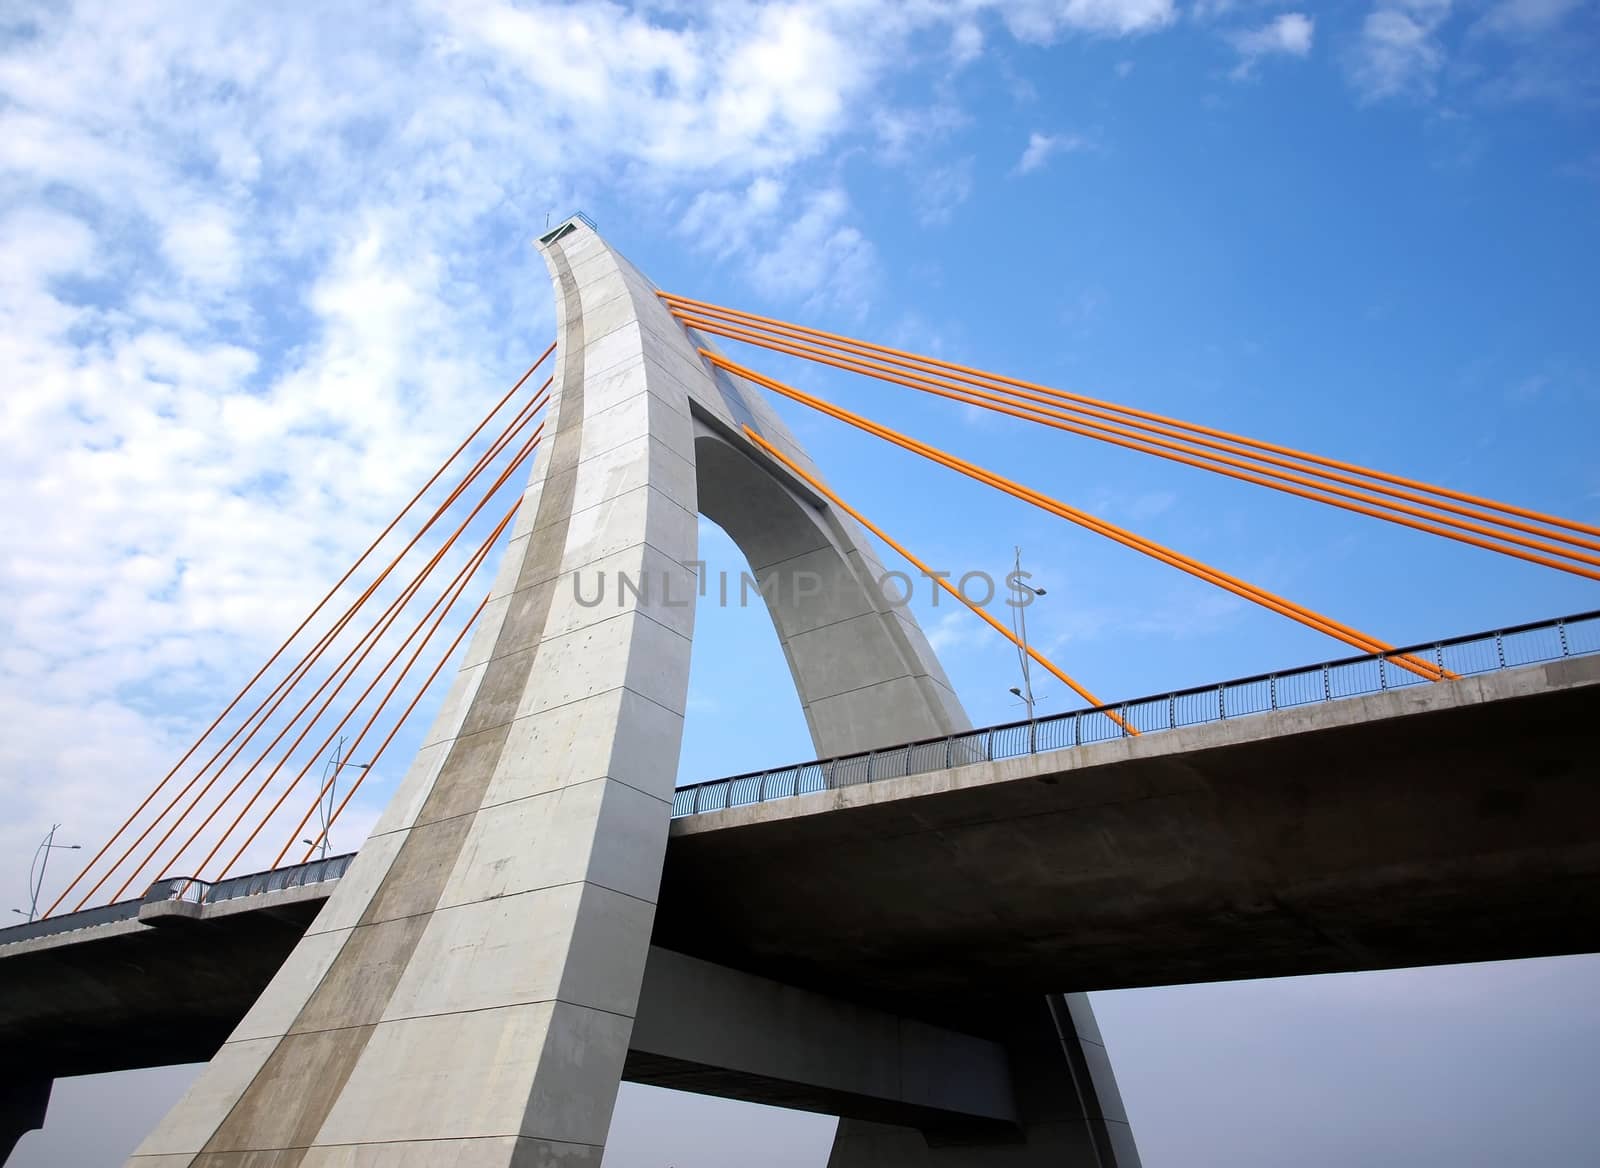 A modern single tower cable stayed bridge with thick steel cables